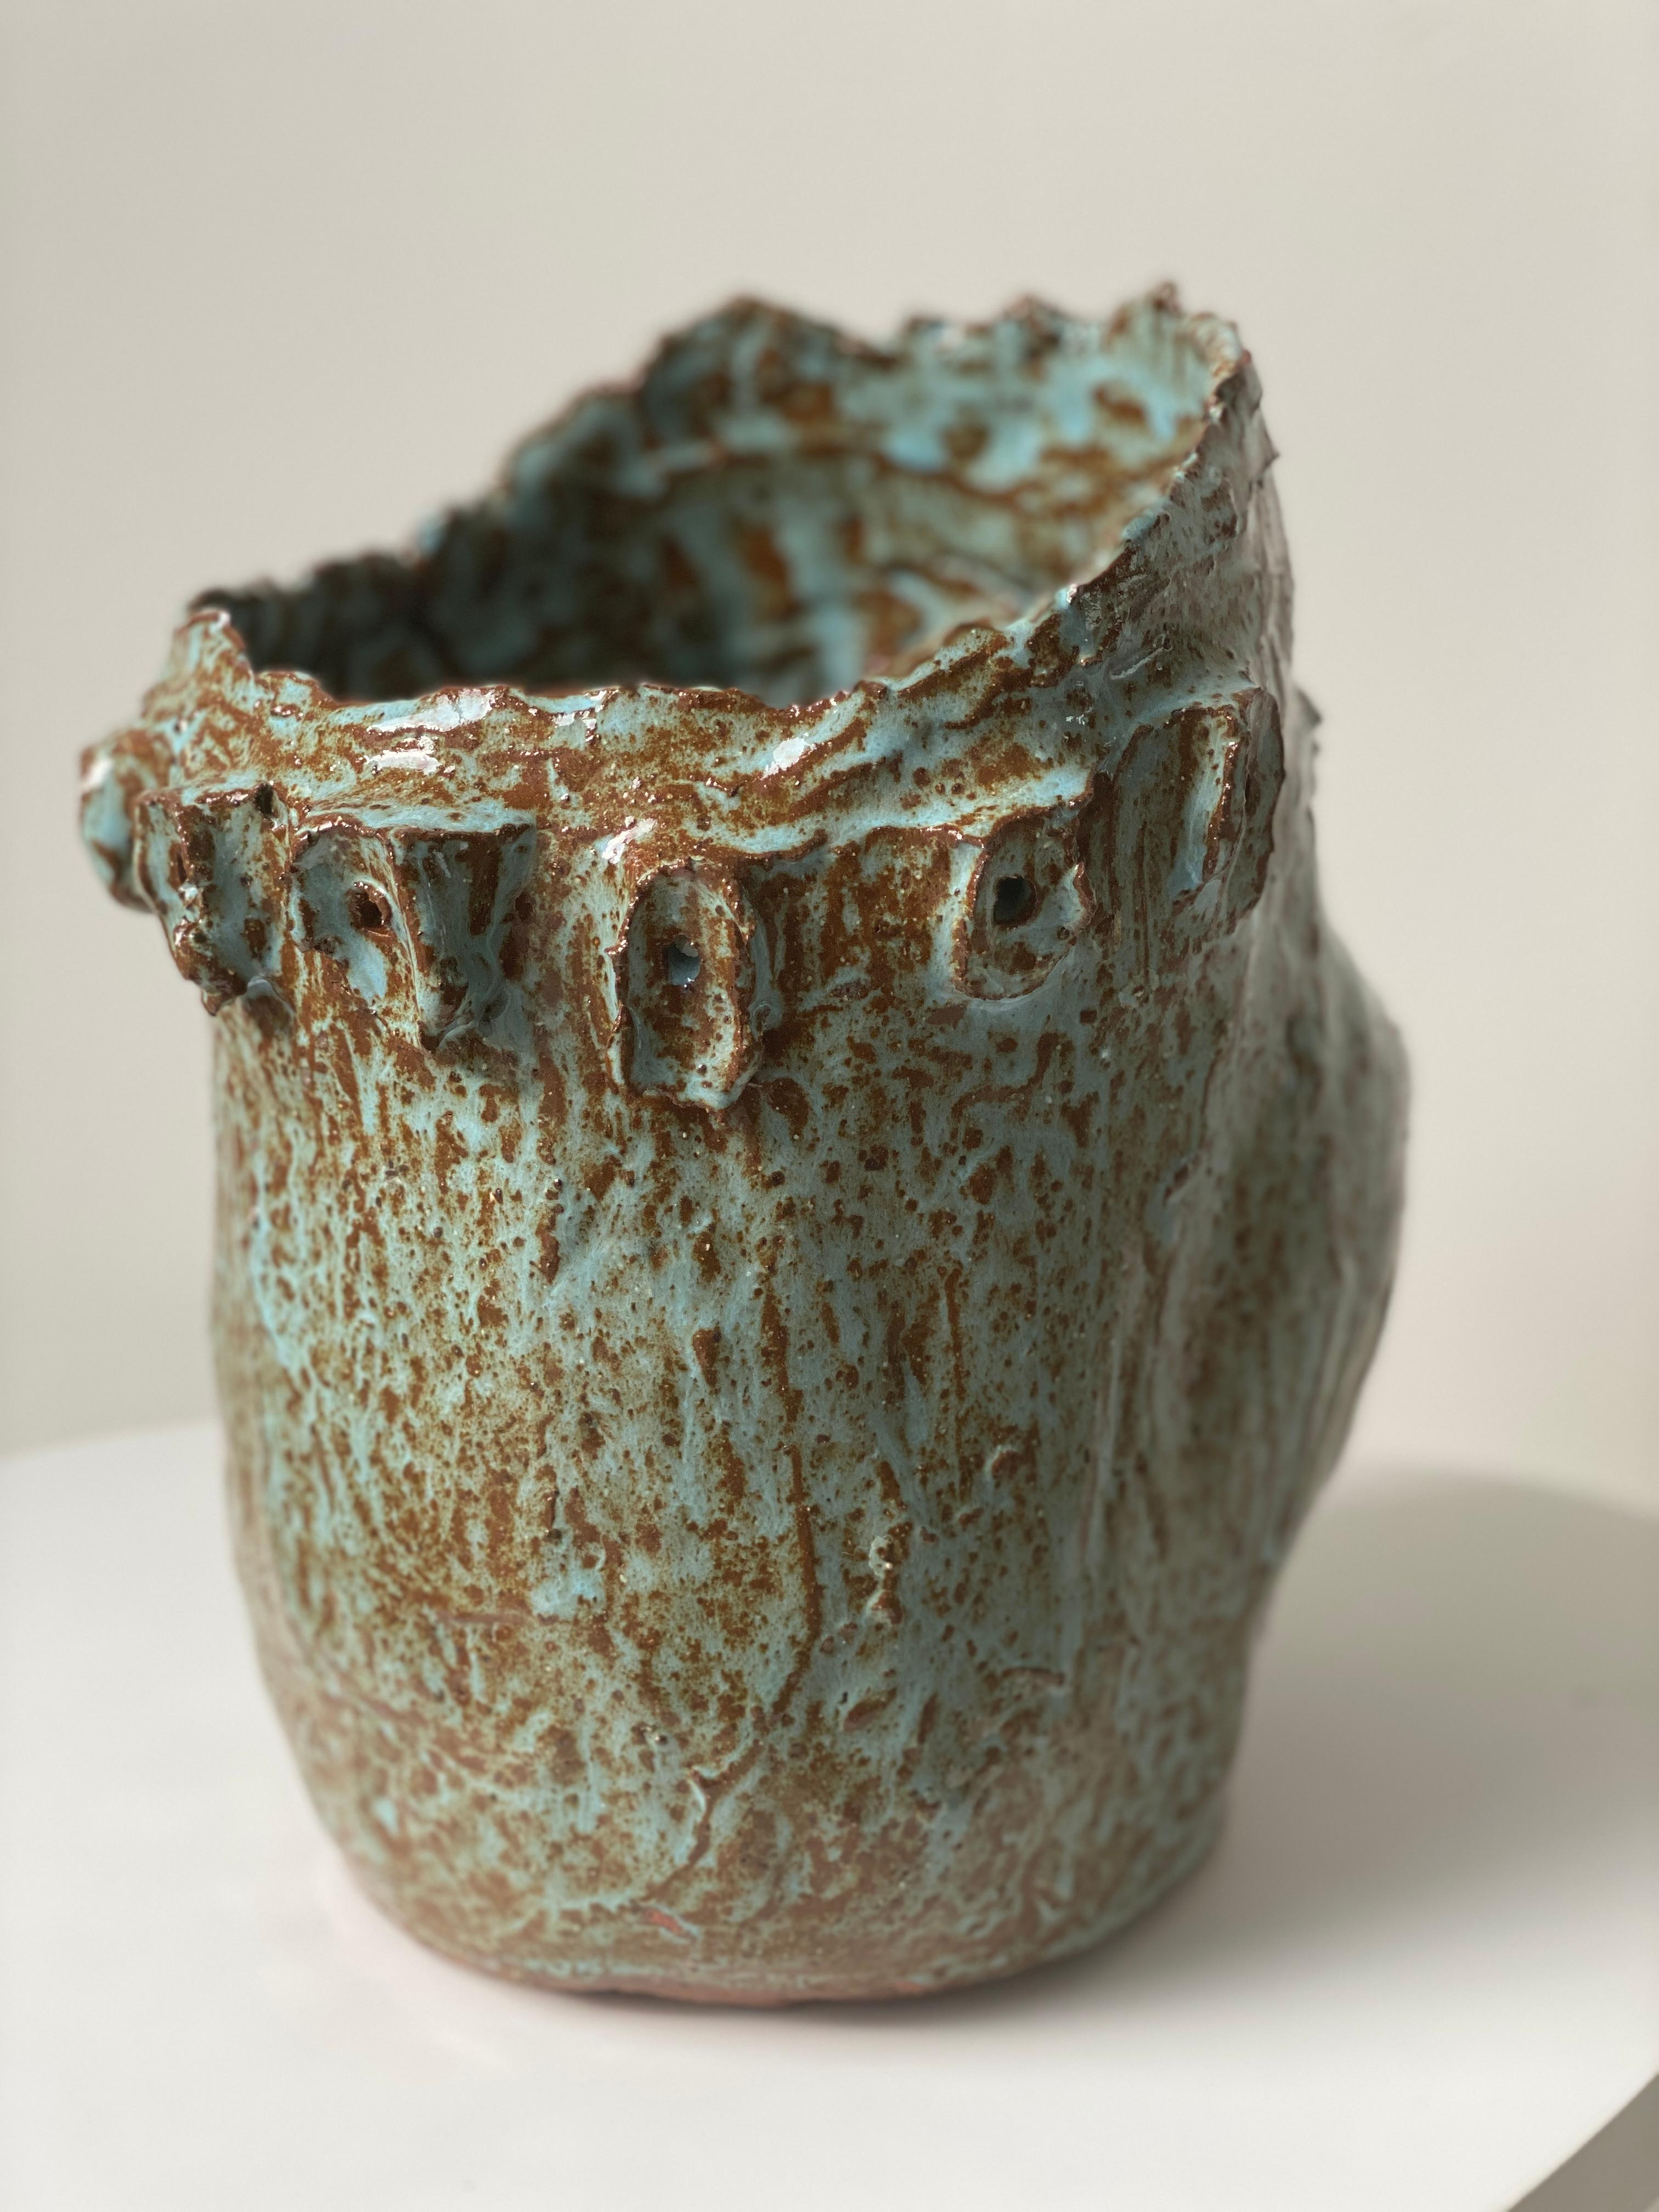 Turquoise sienna rustic wabi sabi hand sculpted glazed clay face vessel ancient  For Sale 3